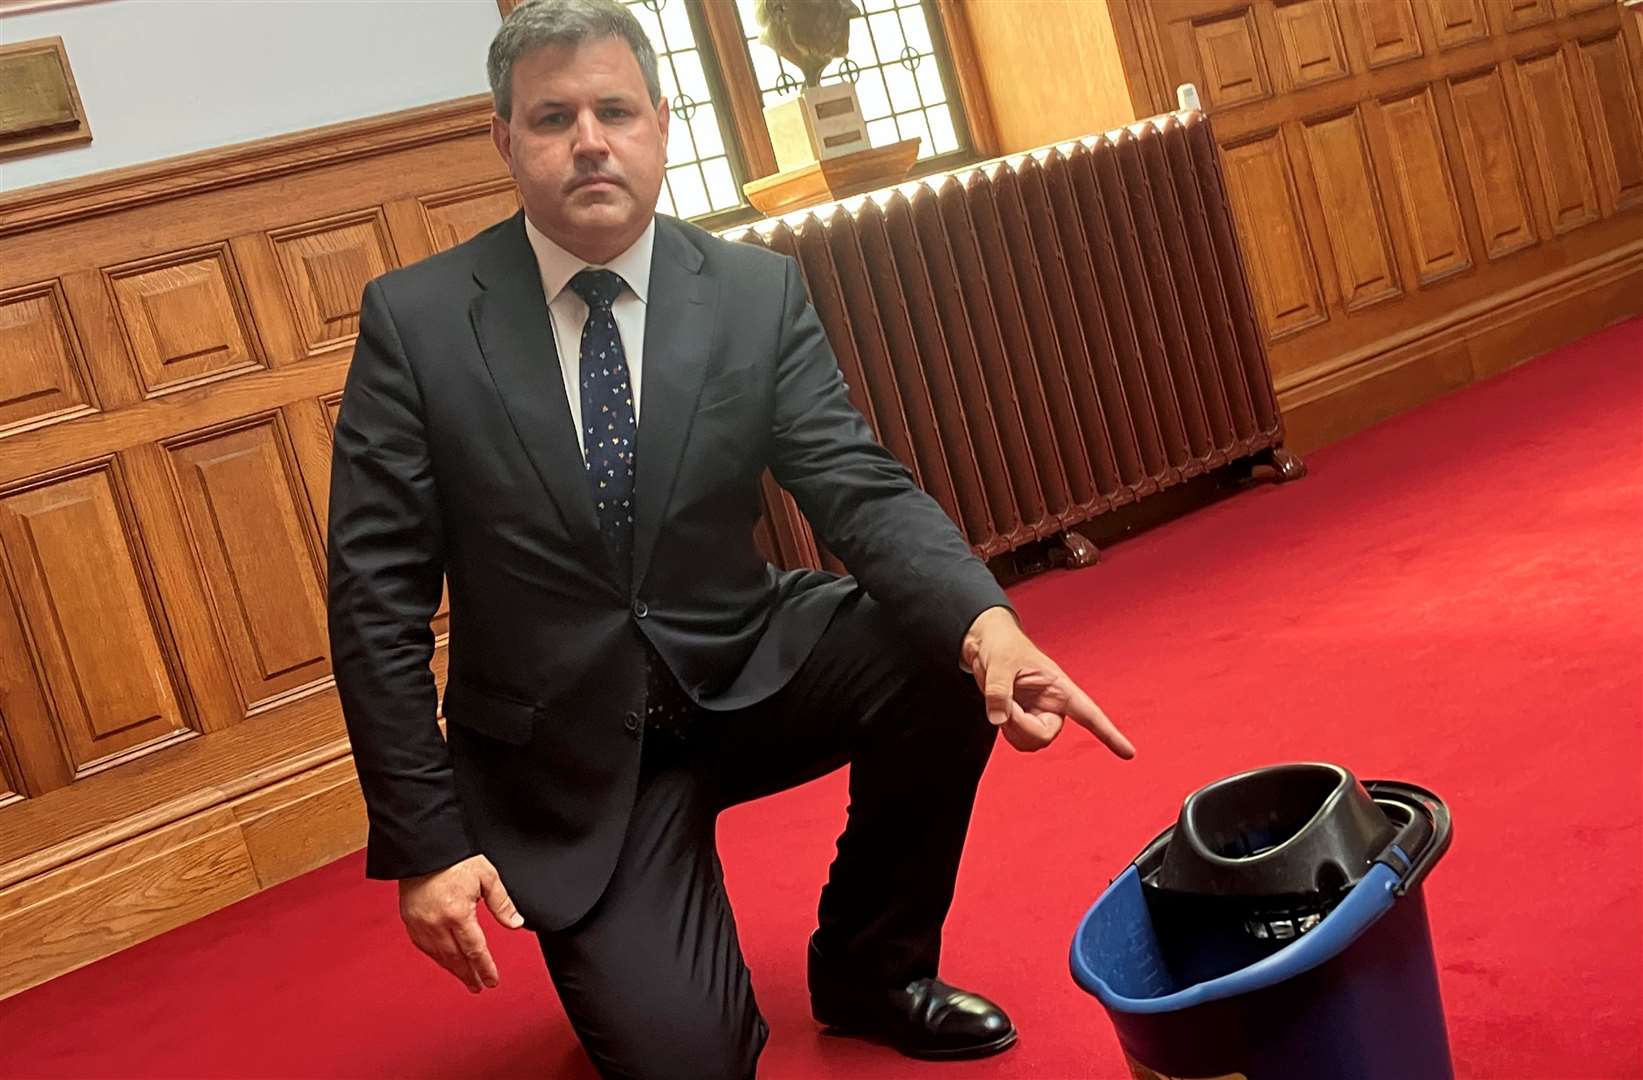 Lib Dem leader Cllr Antony Hook pointing to a bucket collecting water from the leaking roof at County Hall in Maidstone